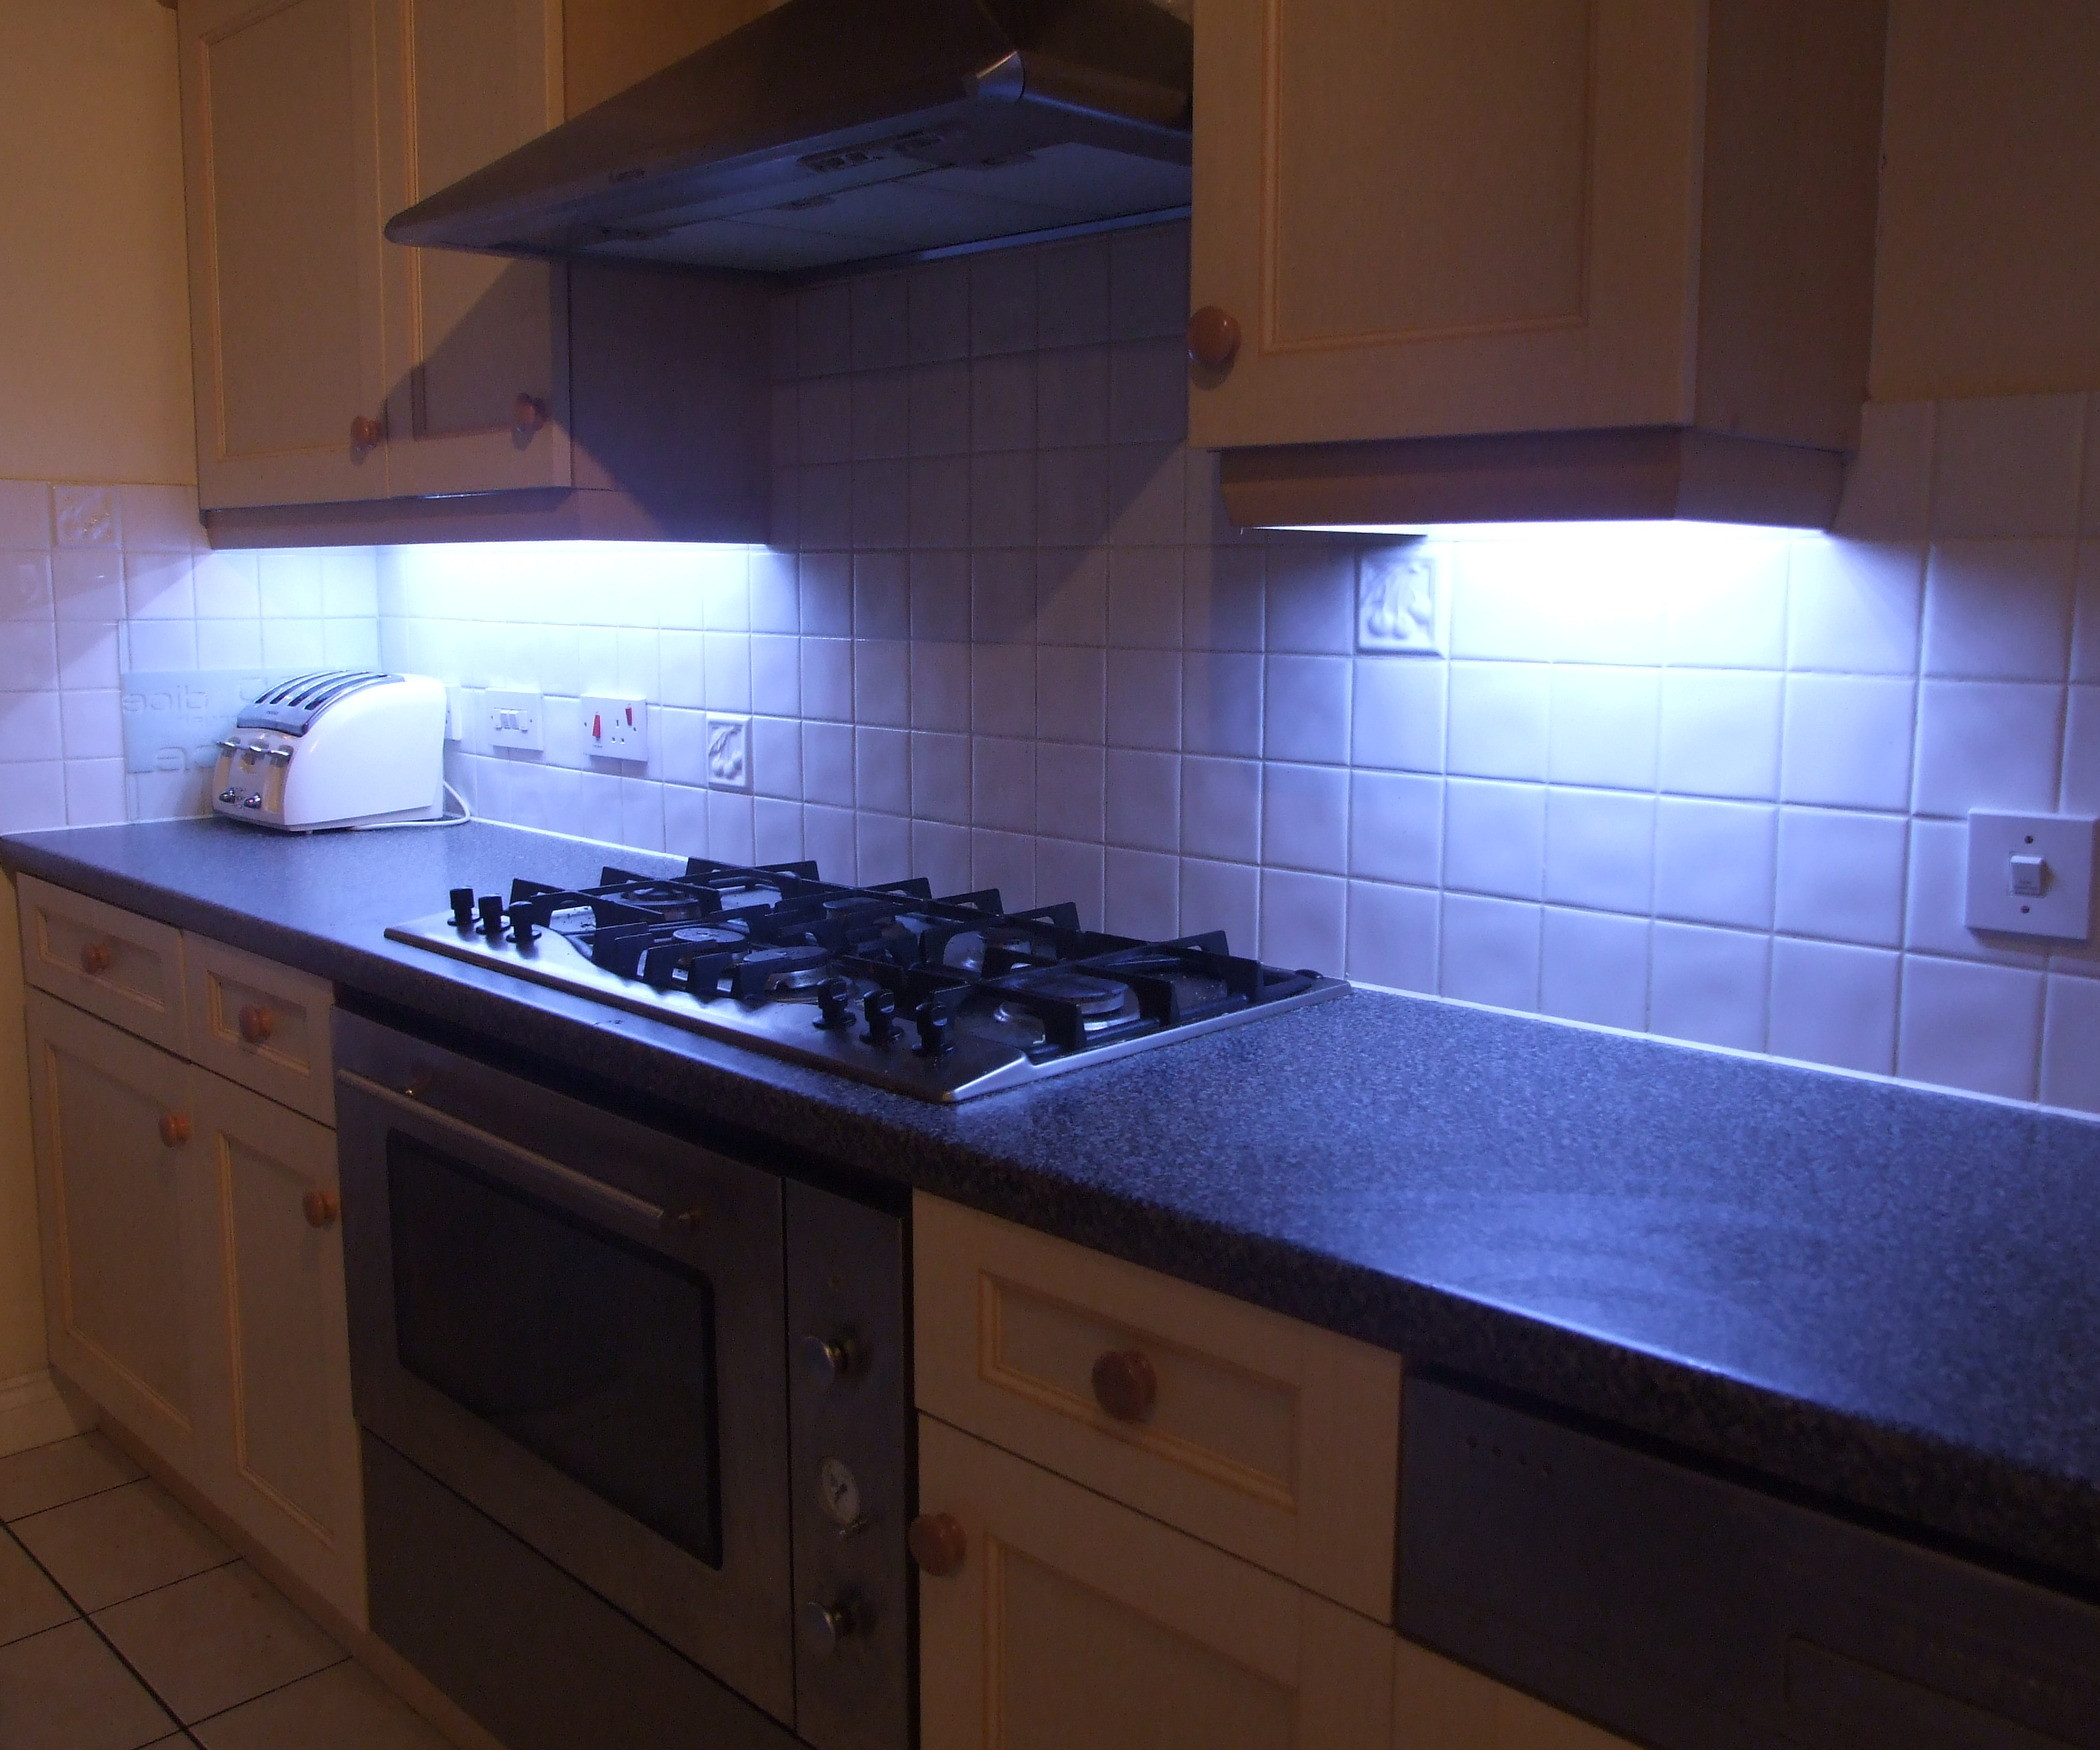 Kitchen Led Lights
 How to Fit LED Kitchen Lights With Fade Effect 7 Steps